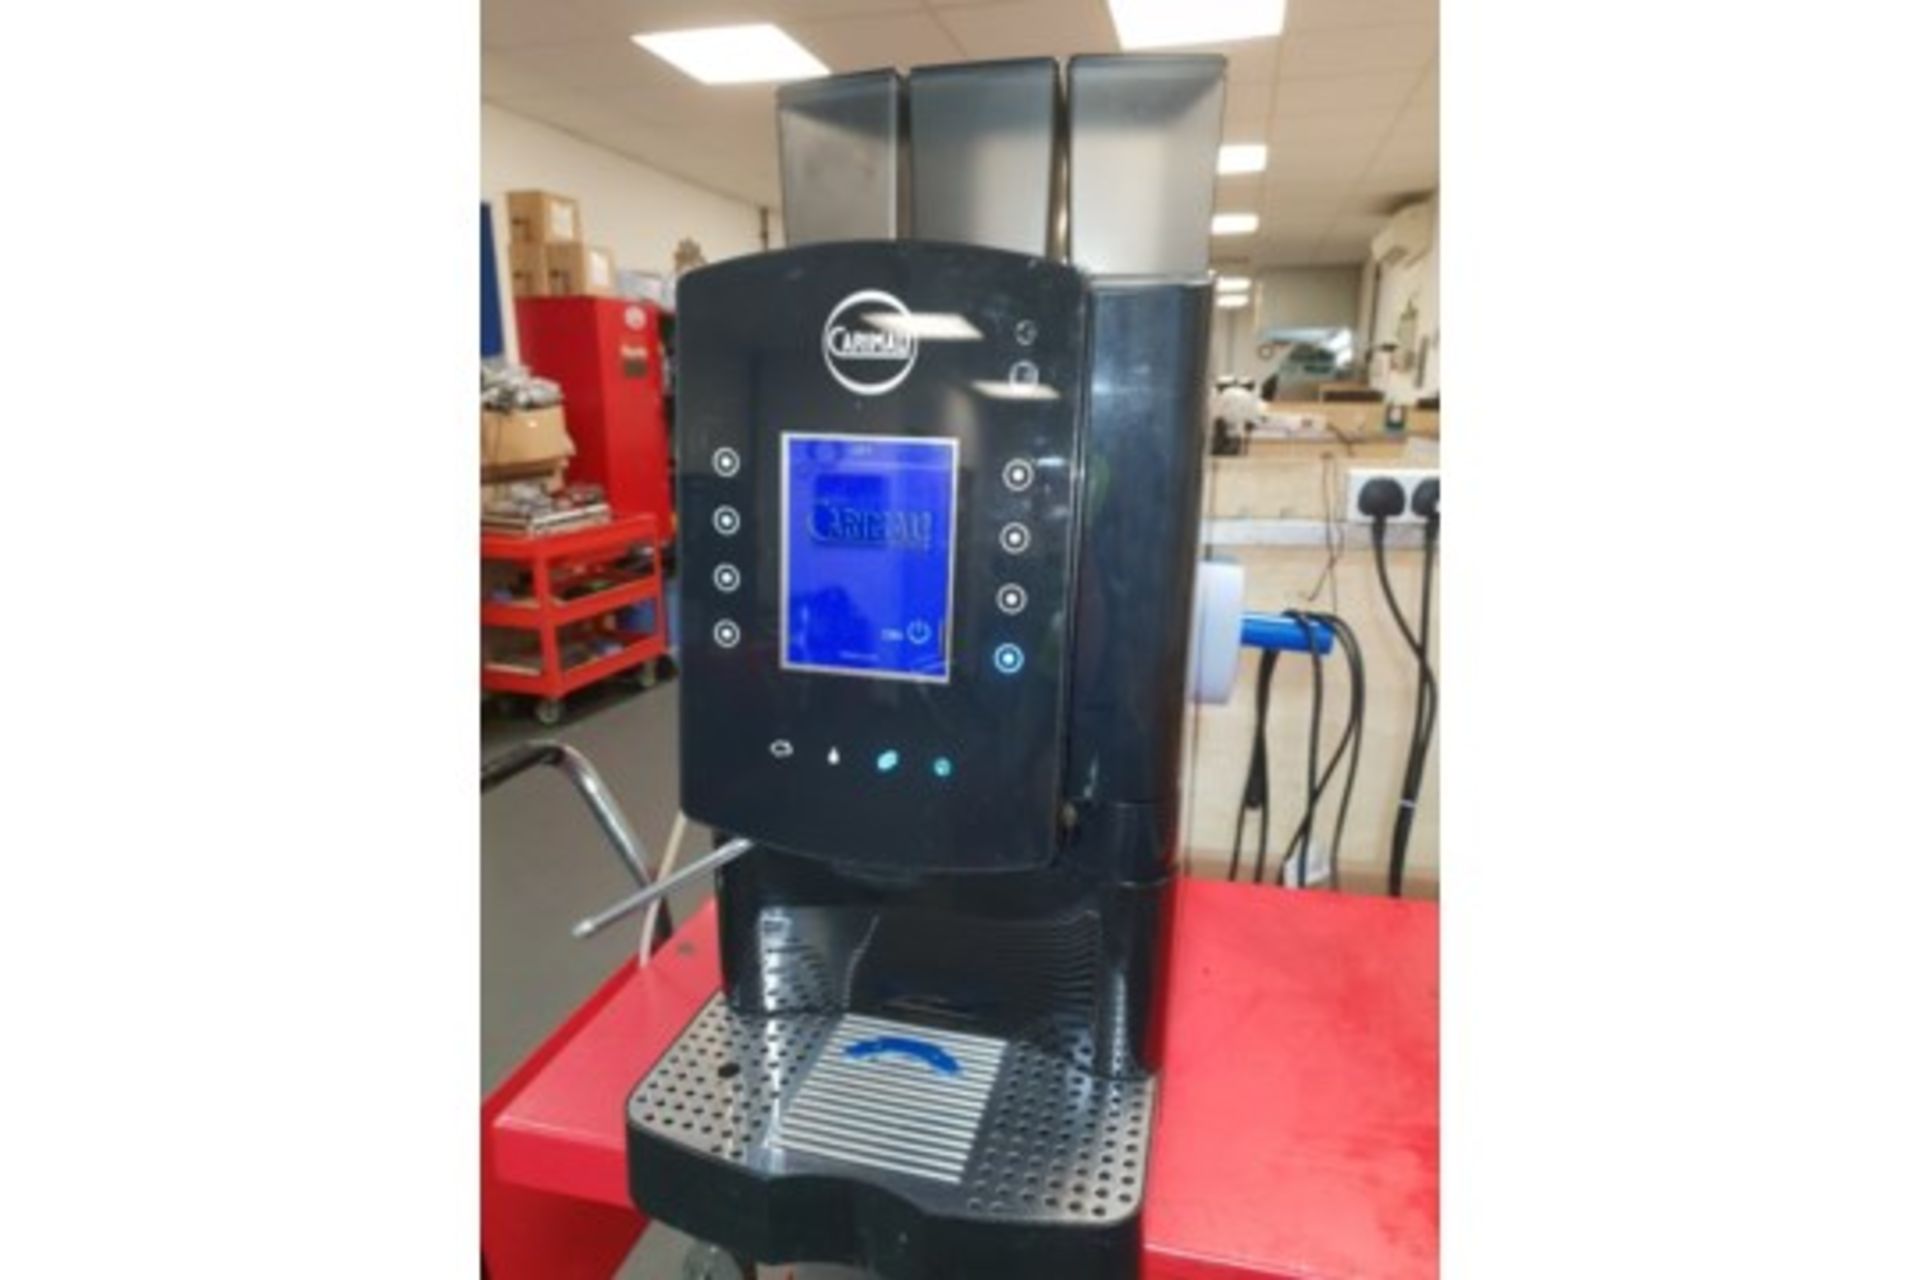 Carimali Solar Touch Drinks Machine – Bean to cup Coffee + Chocolate & Other Drinks  The Carimali